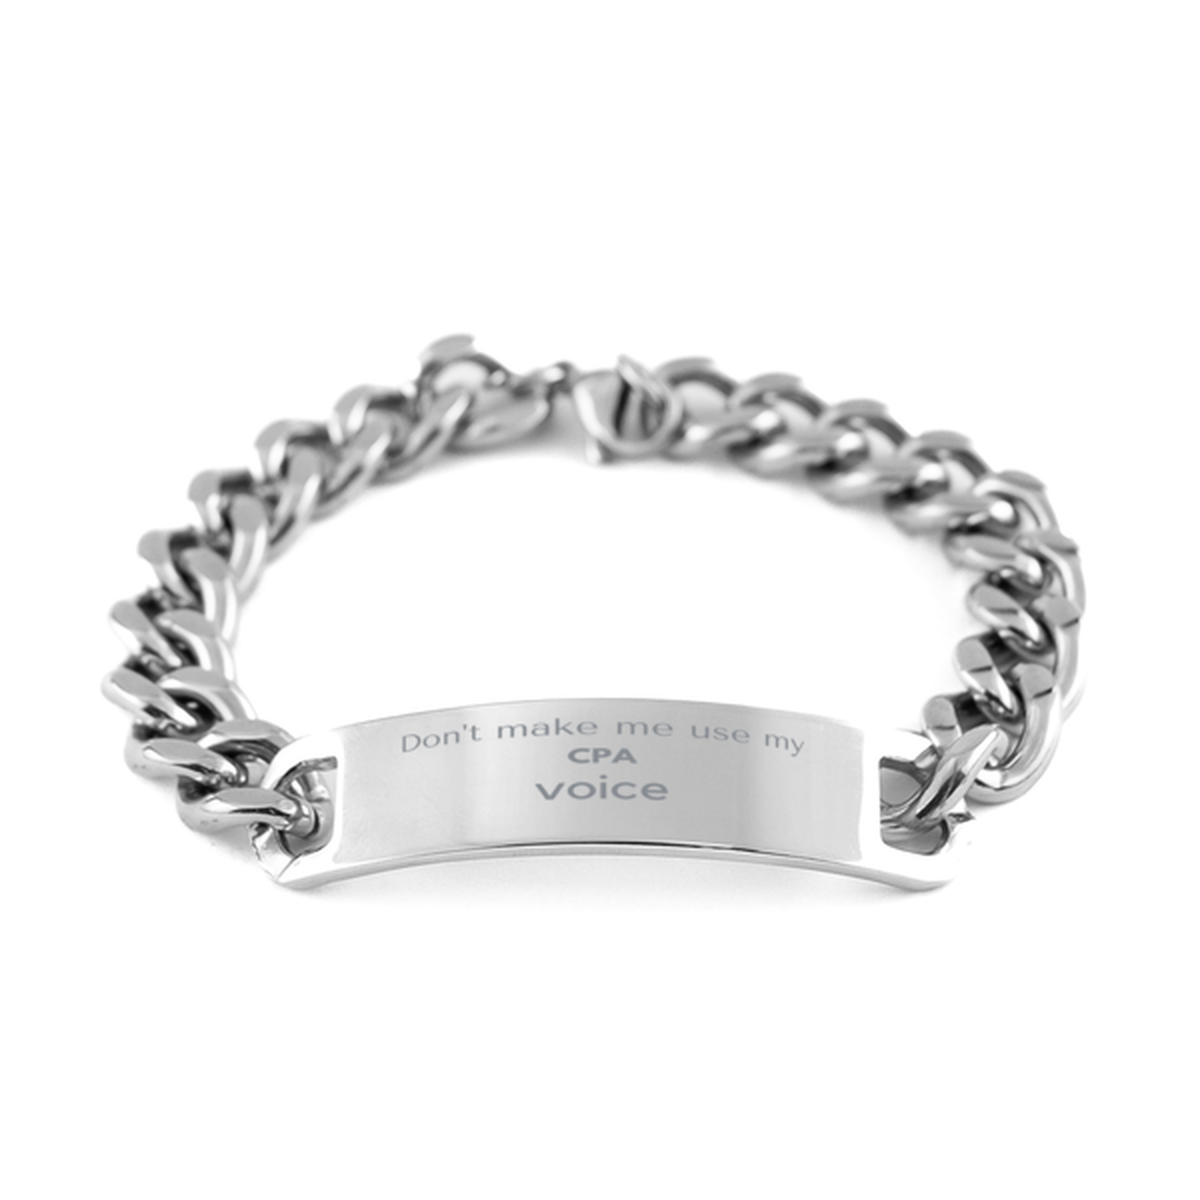 Don't make me use my CPA voice, Sarcasm CPA Gifts, Christmas CPA Cuban Chain Stainless Steel Bracelet Birthday Unique Gifts For CPA Coworkers, Men, Women, Colleague, Friends